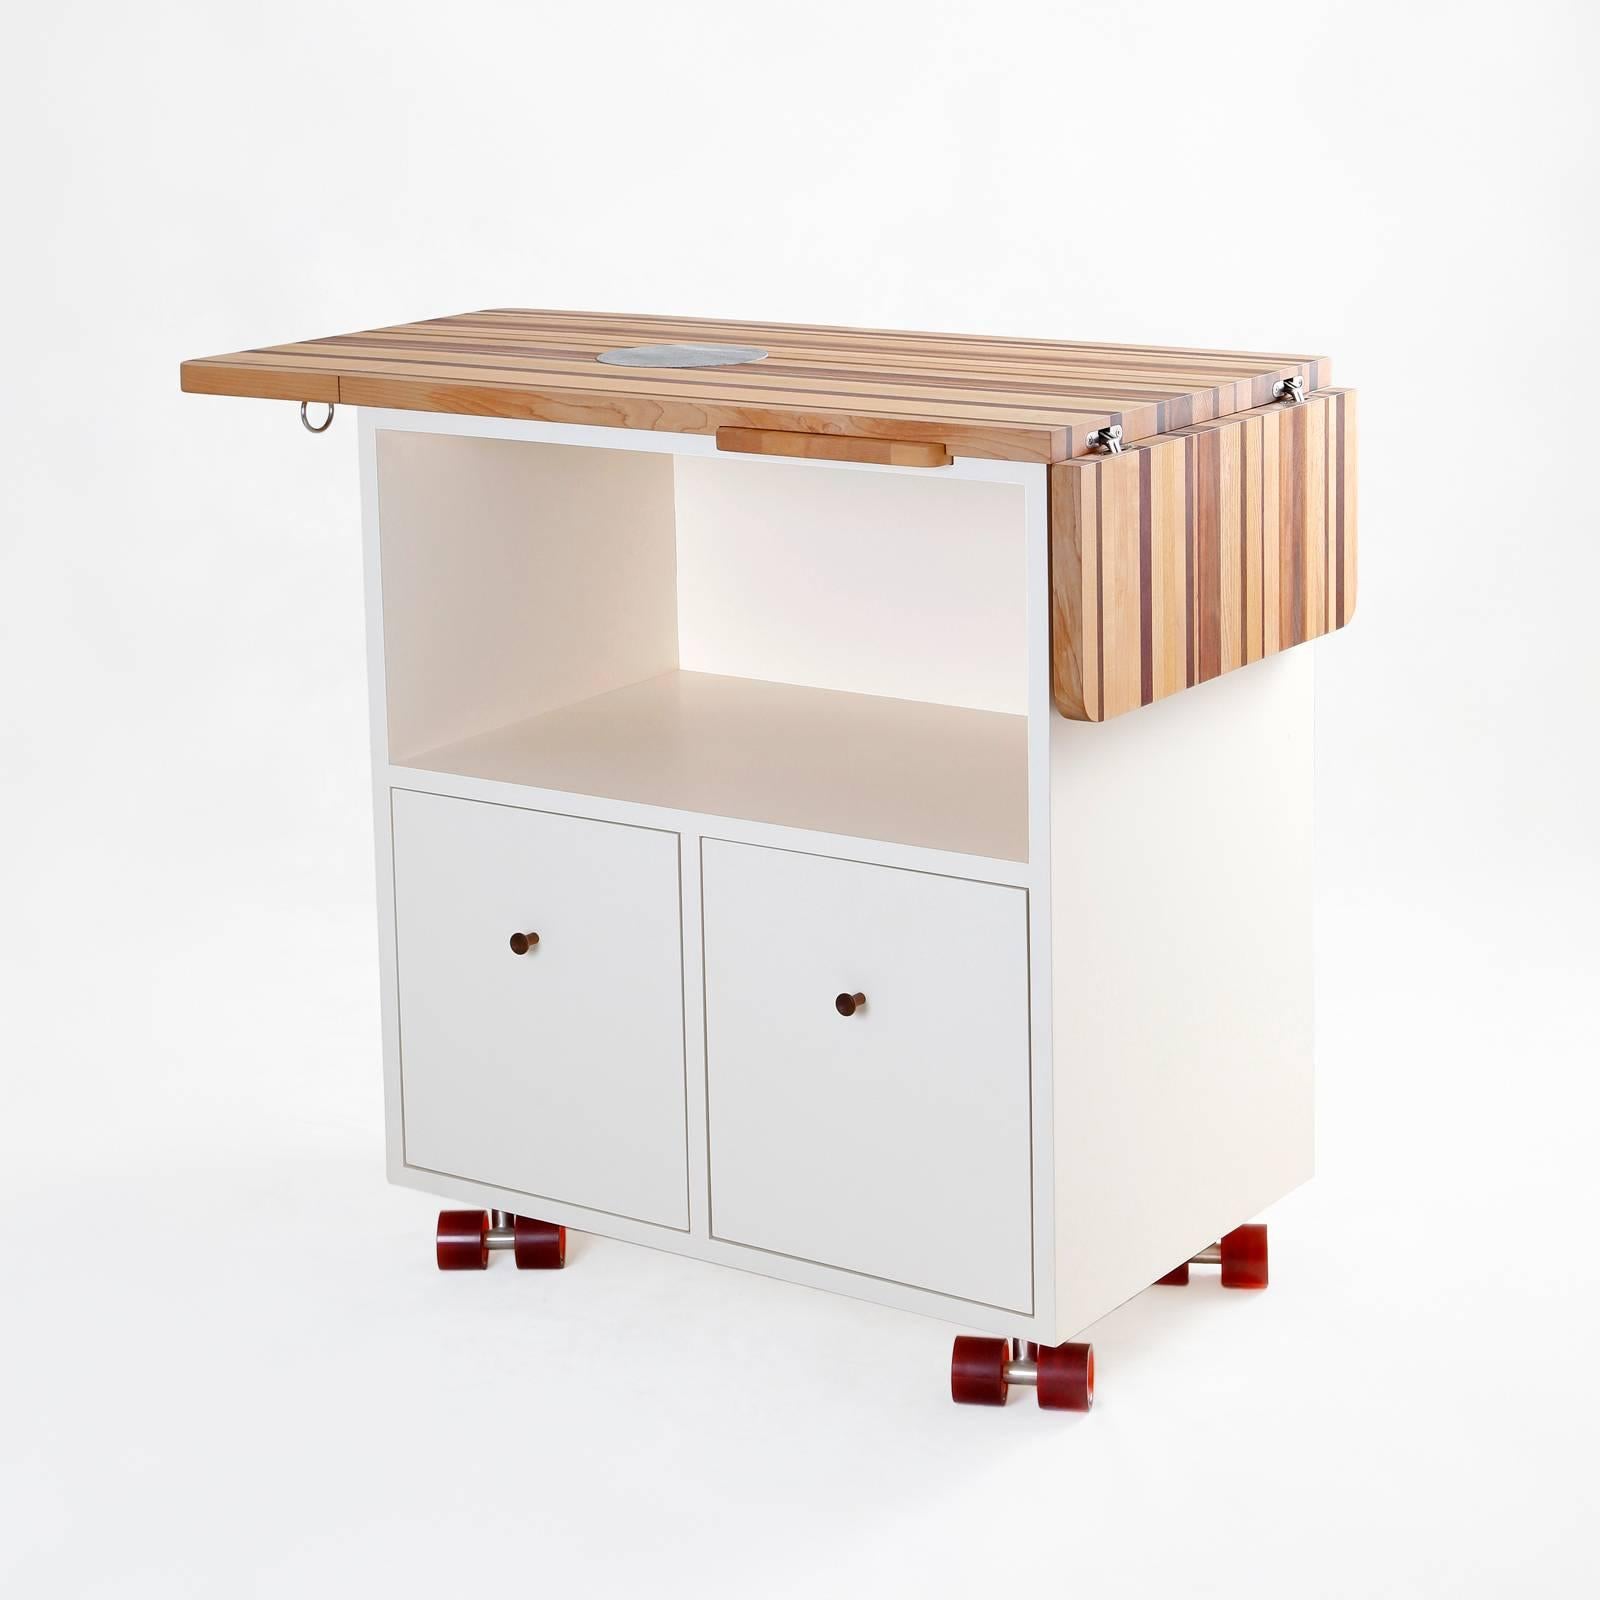 The mobile bar is meant to be flexible and multifunctional with compact storage and wood surfaces that retract. Various woods are aesthetically combined for the bar top, with ends that may be extended for a larger service area. An inlaid disk of